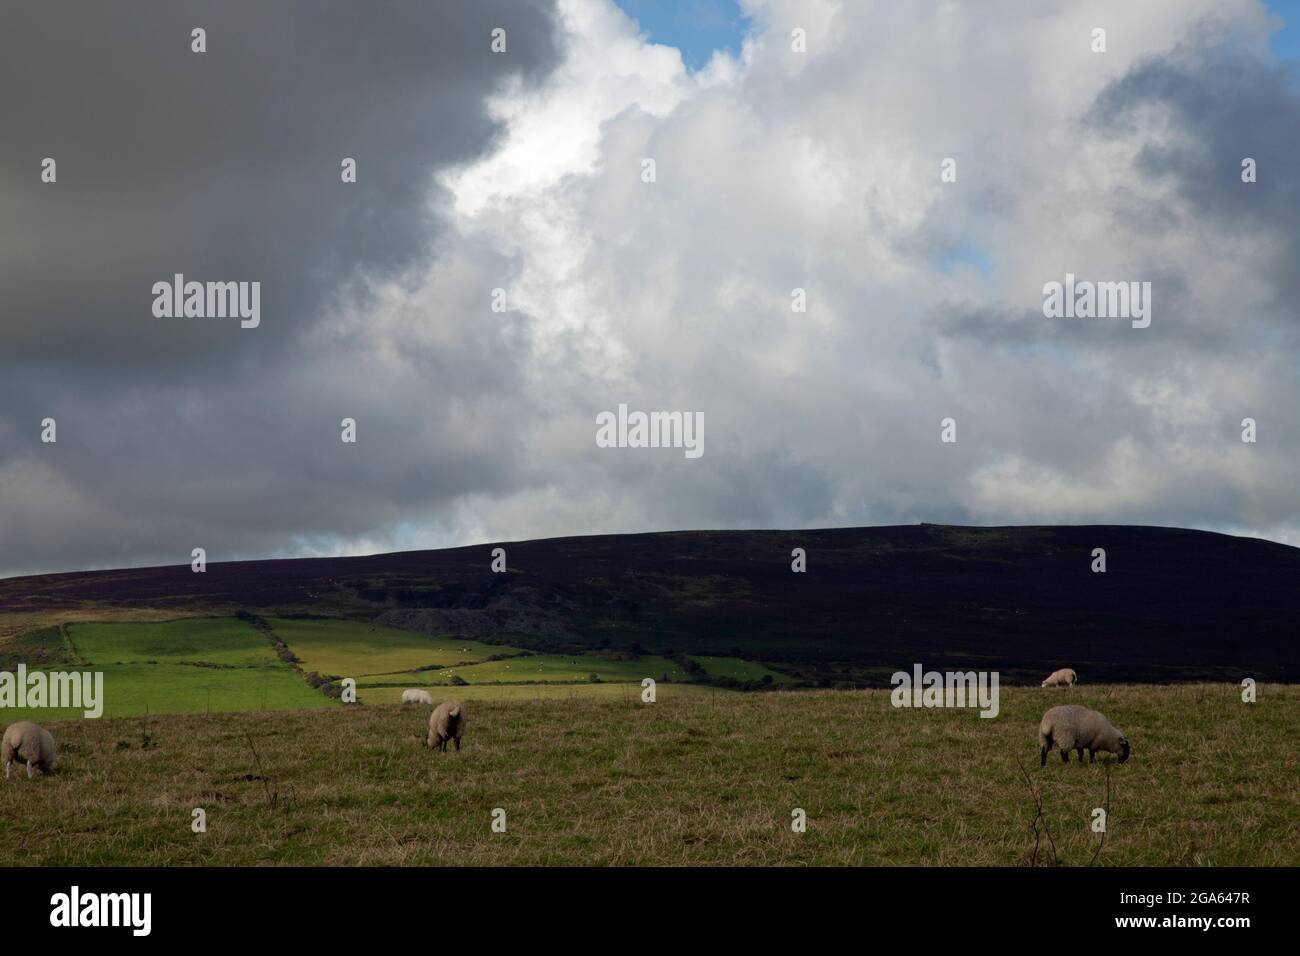 Sheep grazing on a hilltop in Wales, with dark clouds signalling the approach of rain Stock Photo